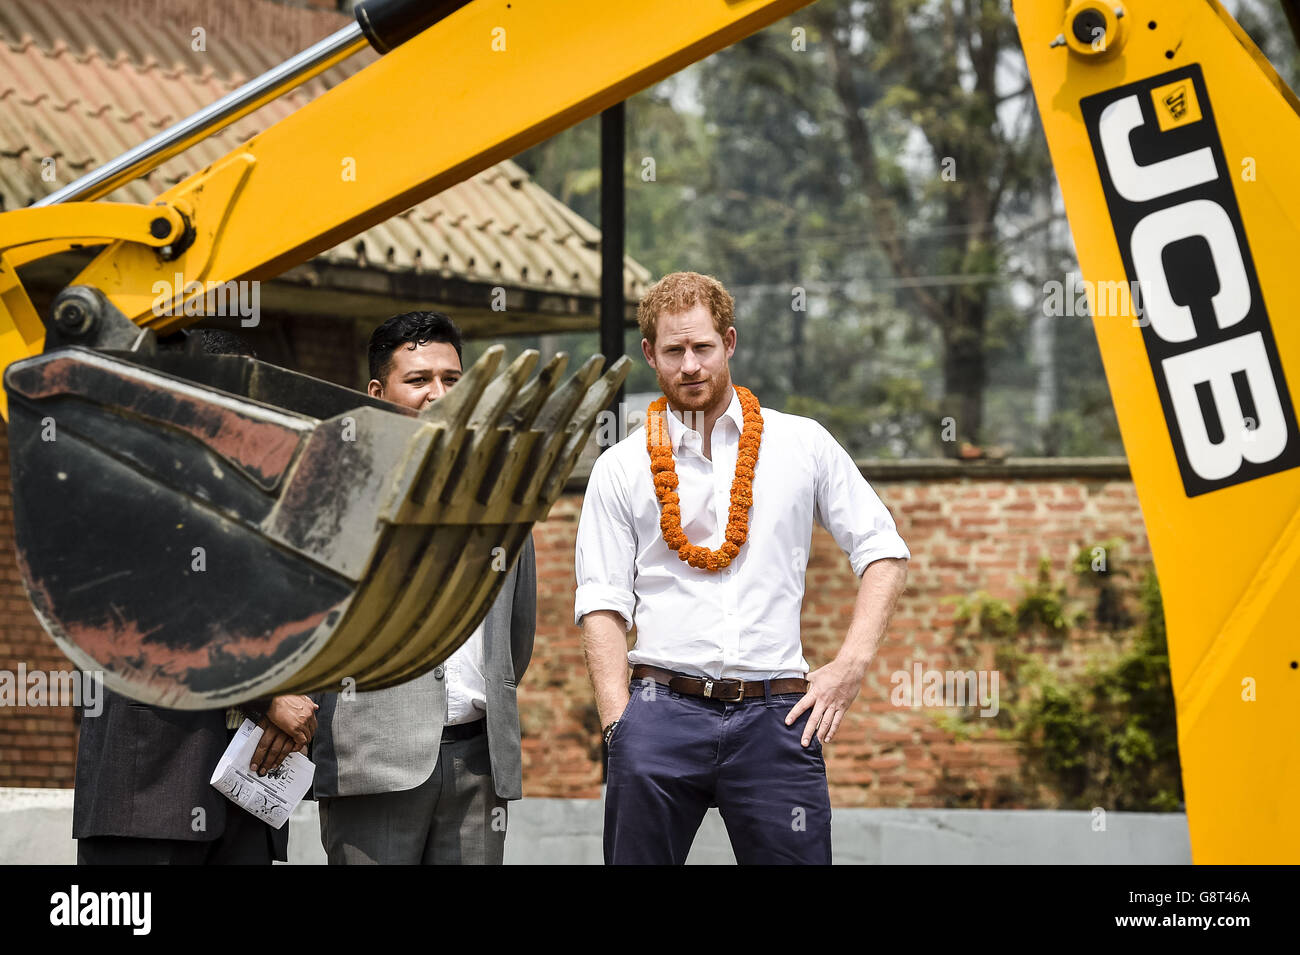 Prince Harry watches students operate a JCB tractor digger at the Samo Thimi Technical School, Bhaktapur, Nepal, which provides technical skills to underprivileged young Nepalese. Stock Photo